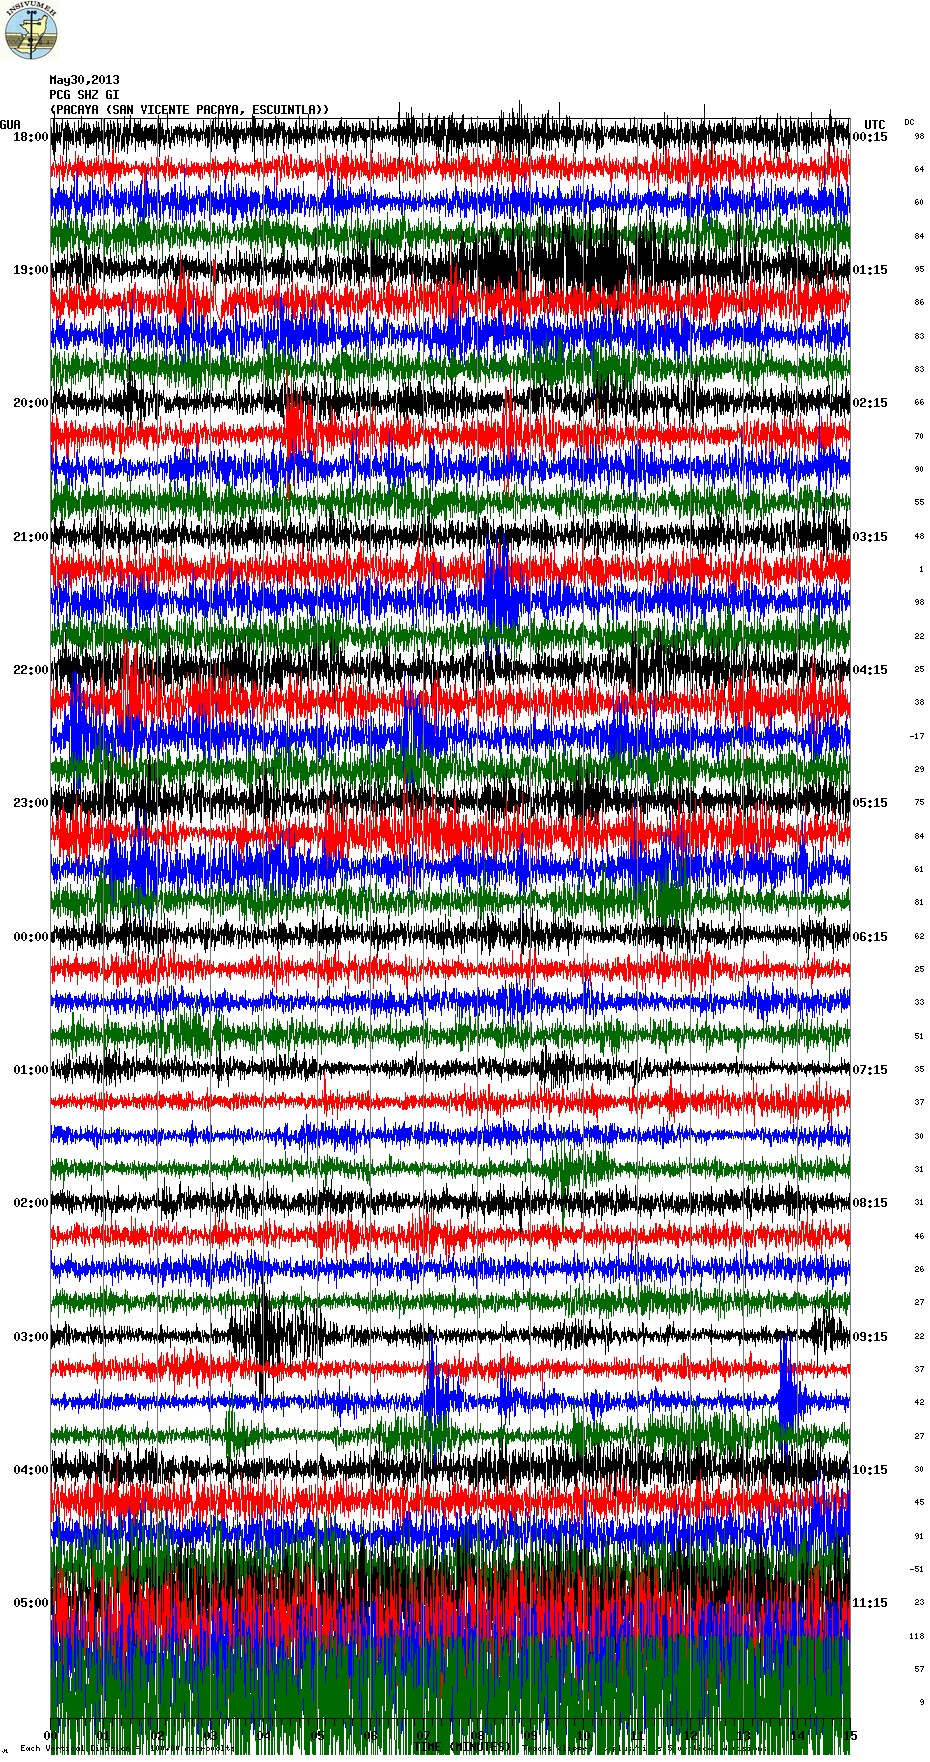 Today's seismic recording from Pacaya (PCG station, INSIVUMEH)